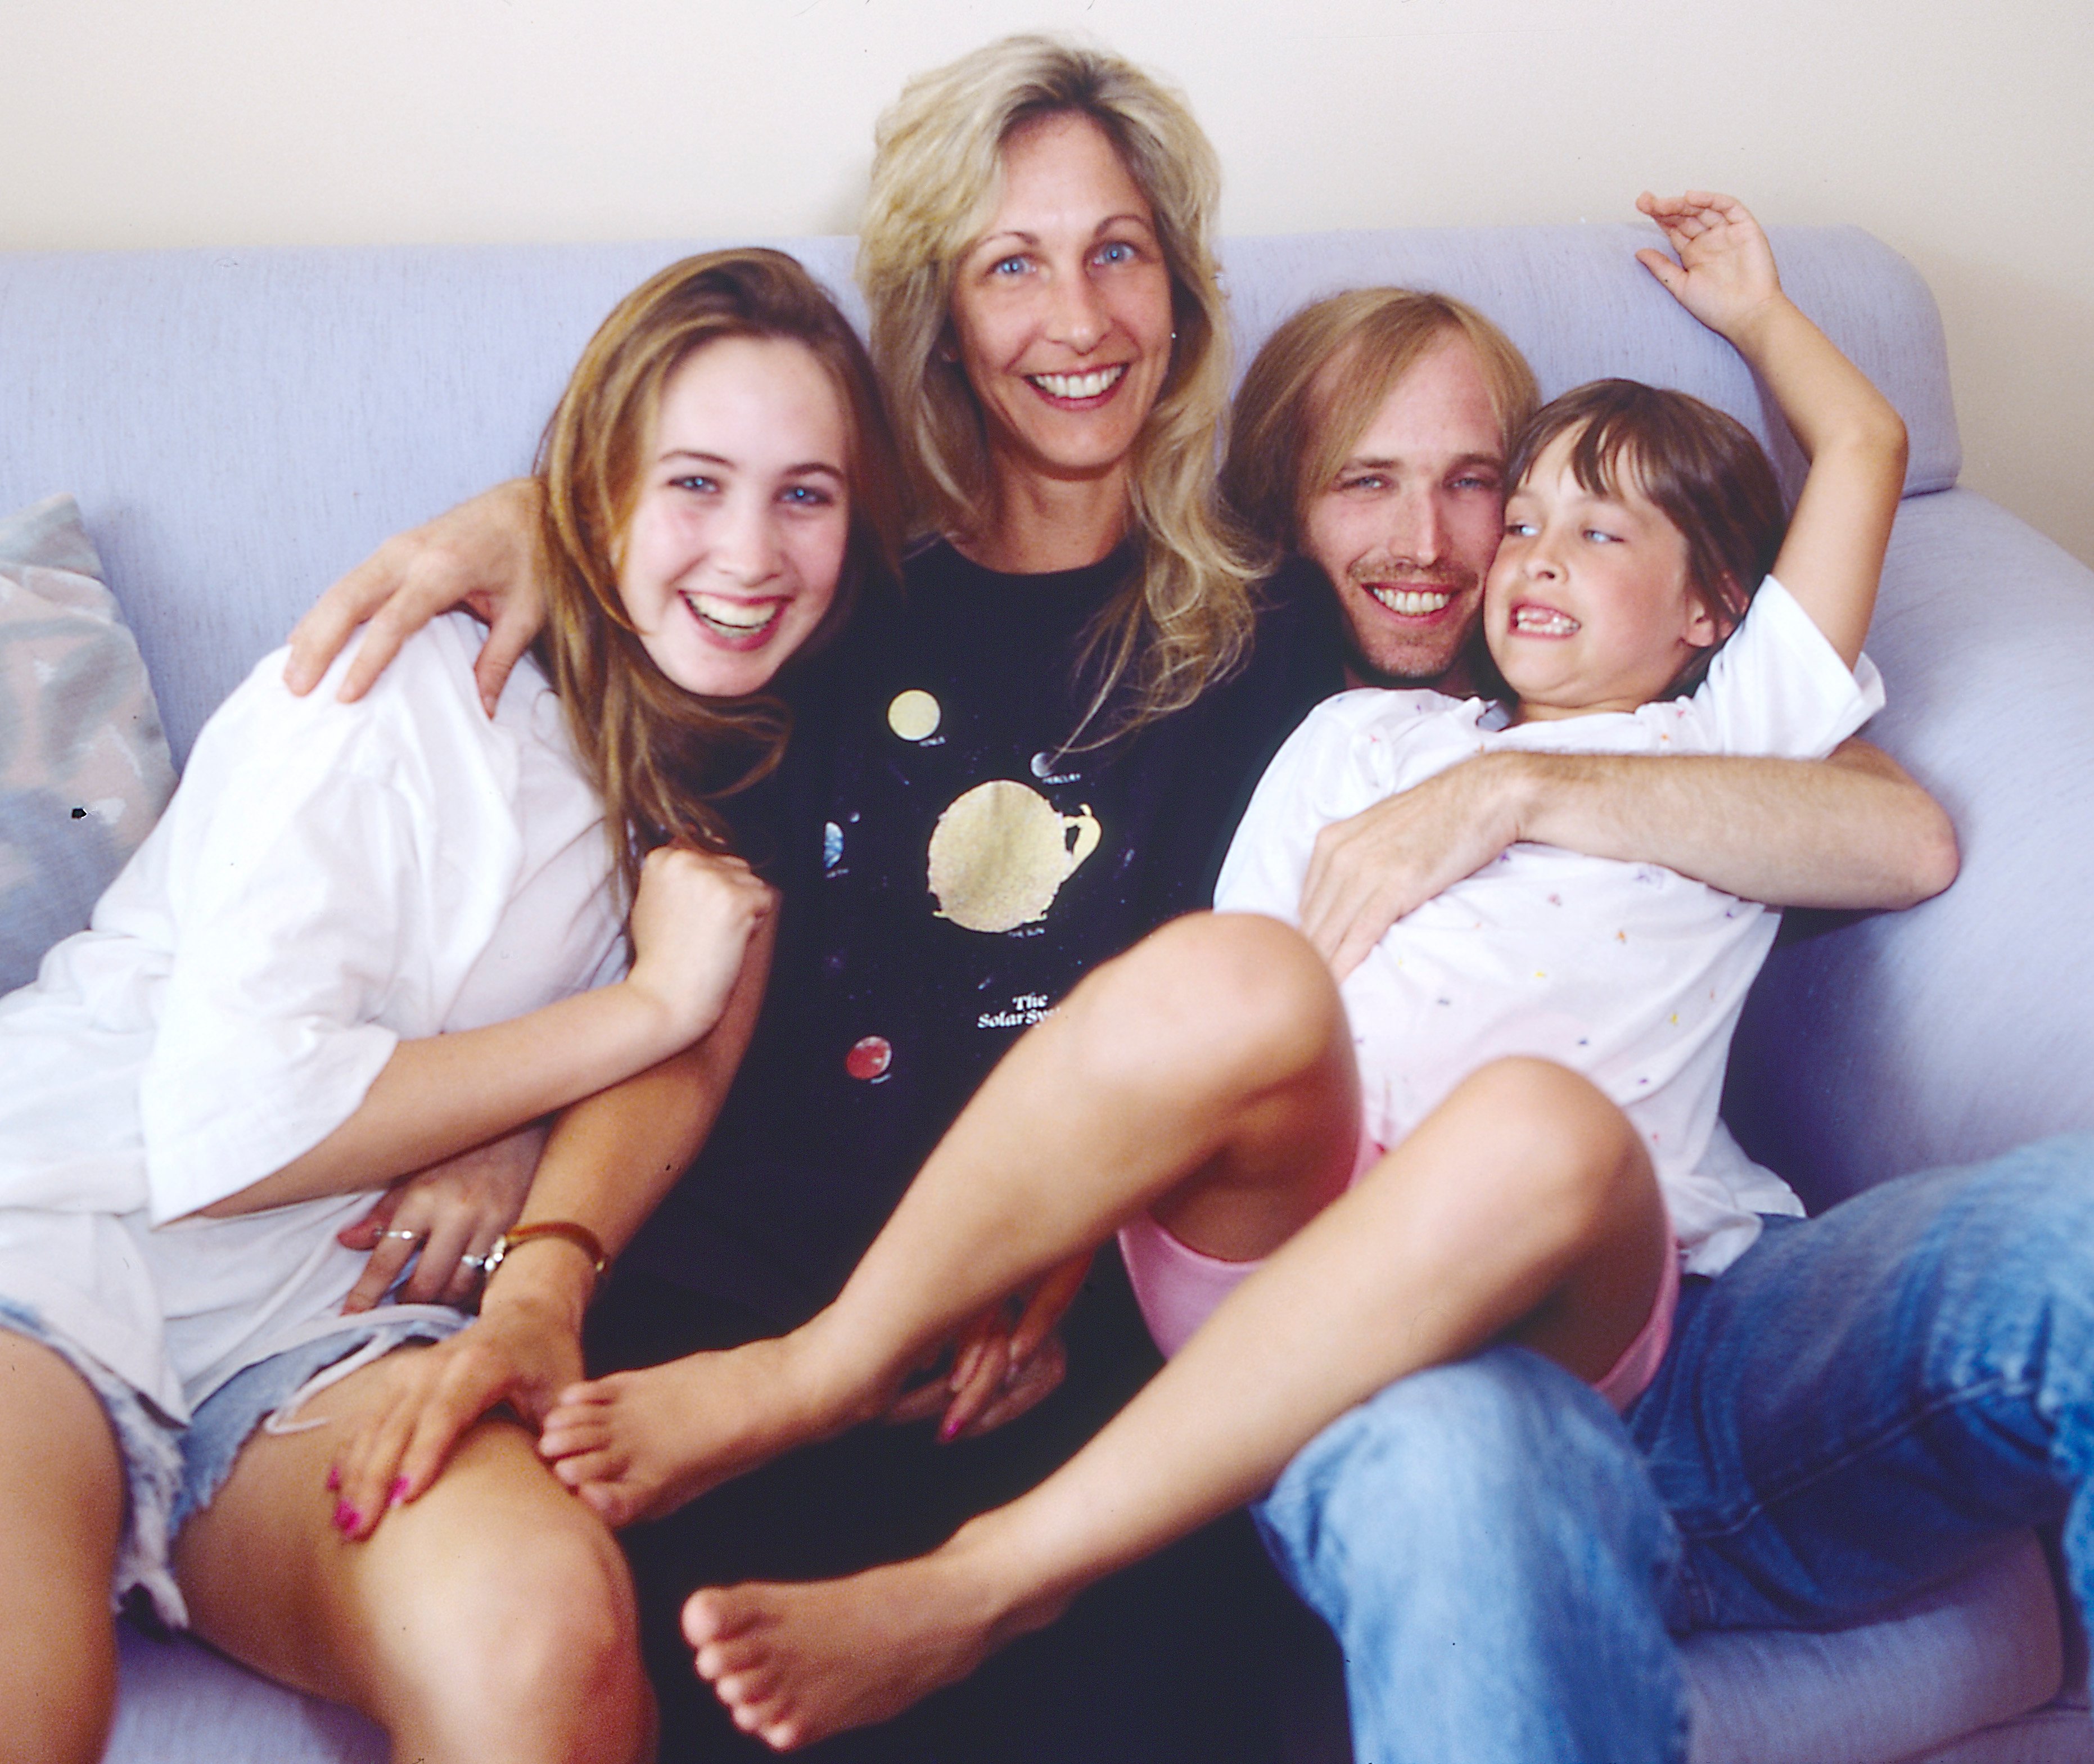 Tom Petty, his ex-wife Jane, and his two kids sit on a couch together in 1978.